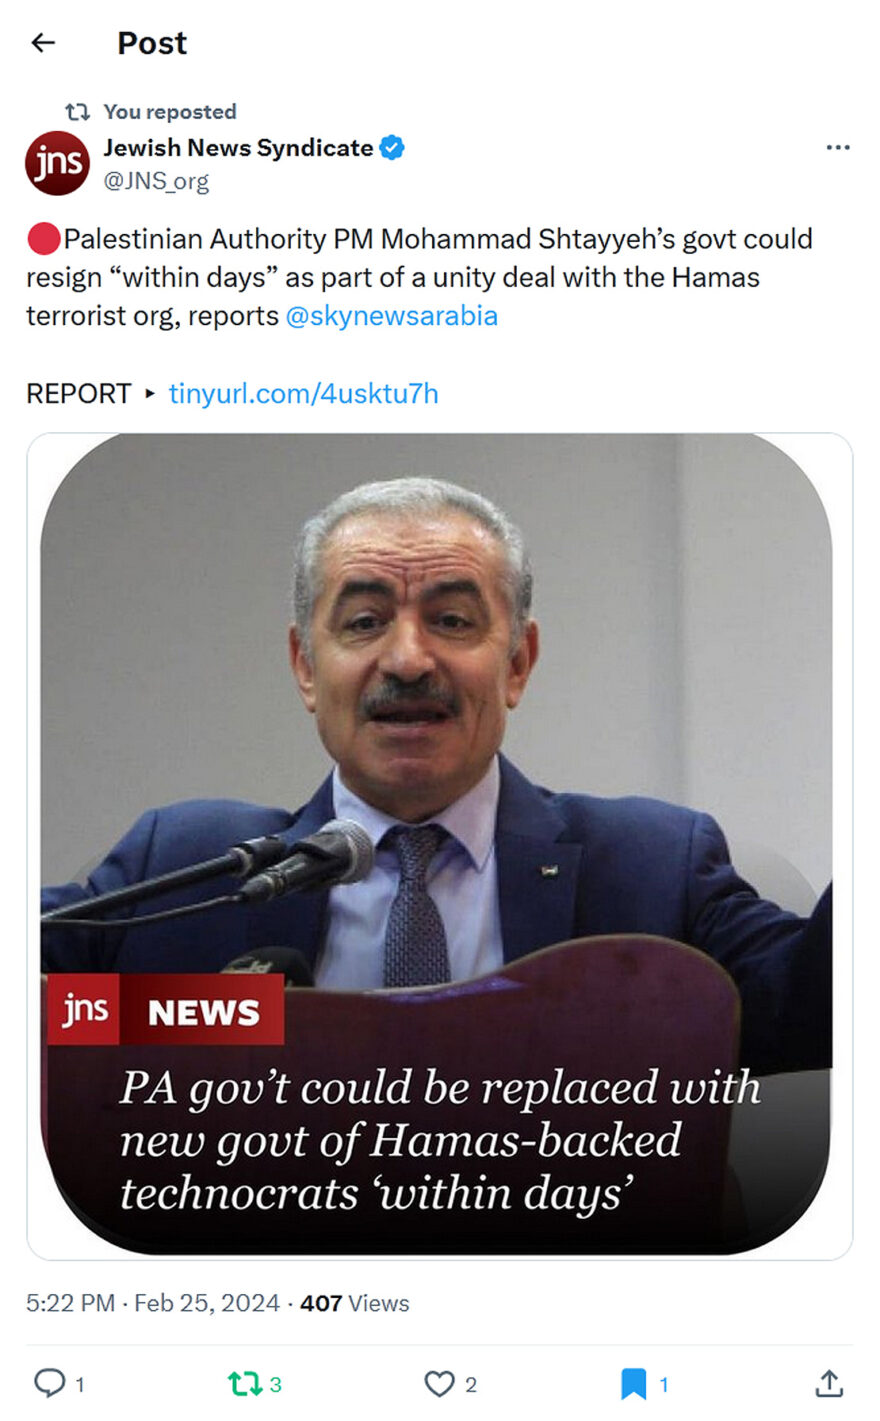 Jewish News Syndicate-tweet-25February2024-Palestinian Authority replaced by Hamas